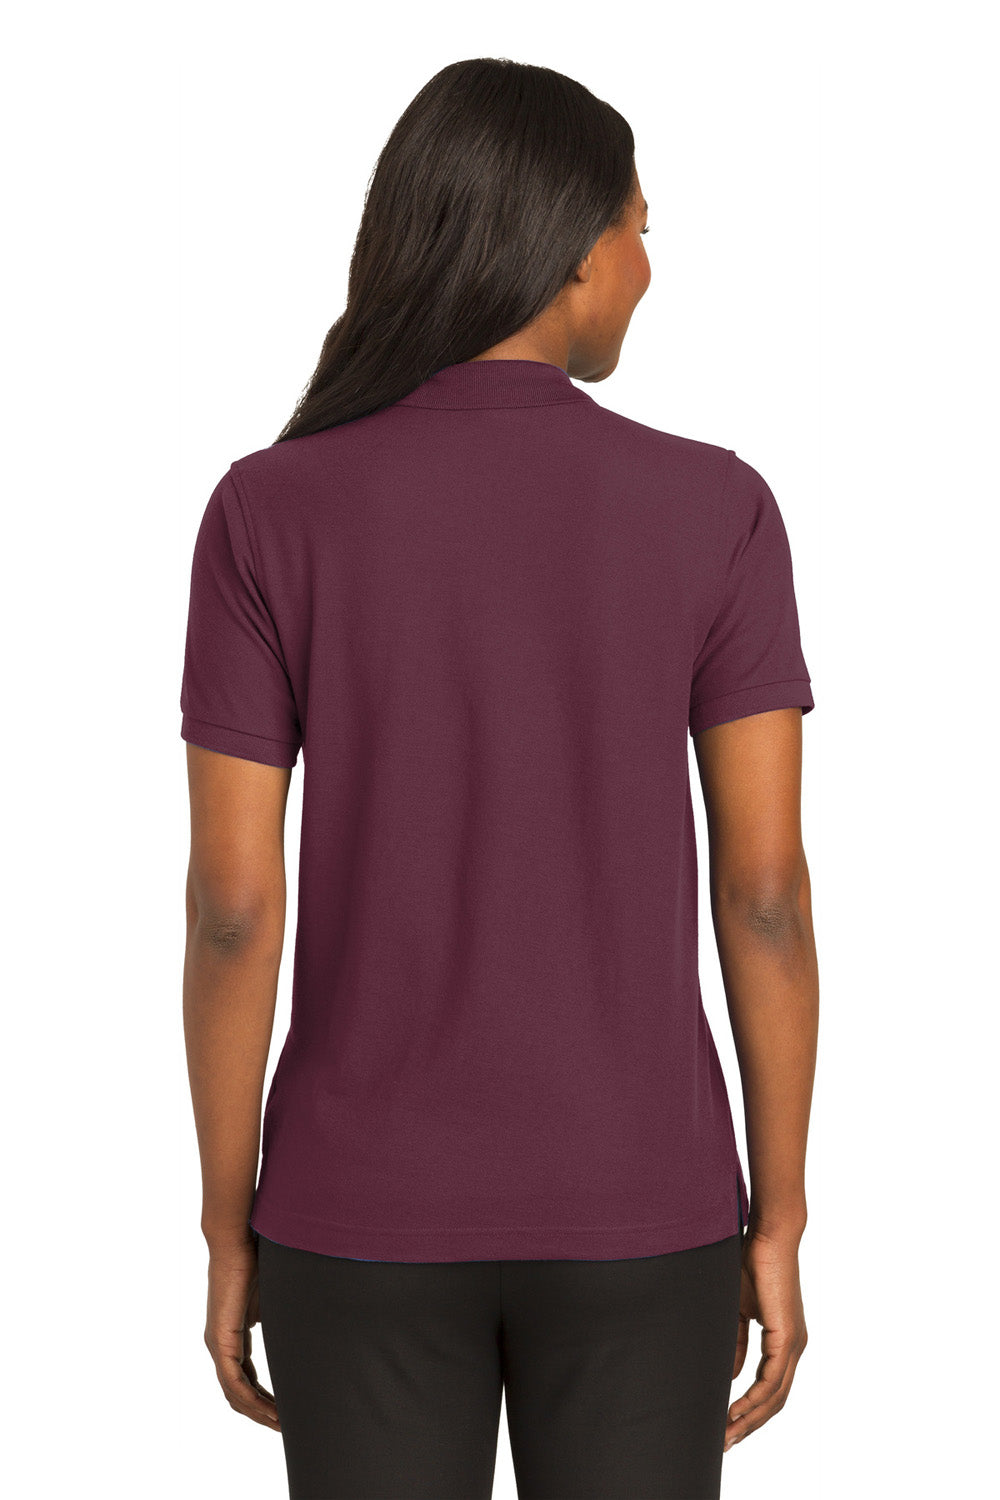 Port Authority L500 Womens Silk Touch Wrinkle Resistant Short Sleeve Polo Shirt Burgundy Back